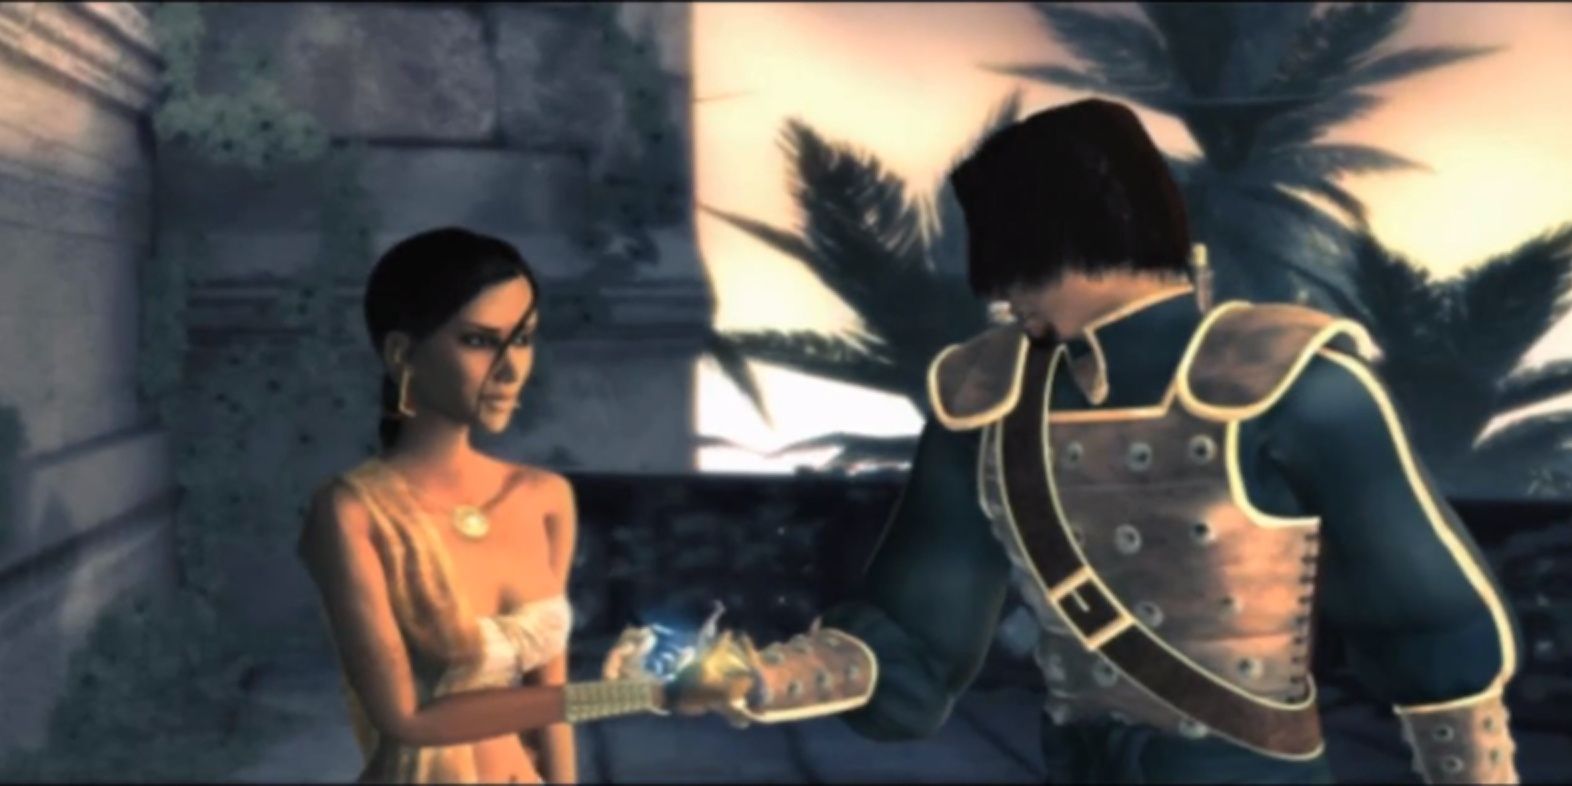 An image of Farah speaking with the Prince during the game, Prince of Persia